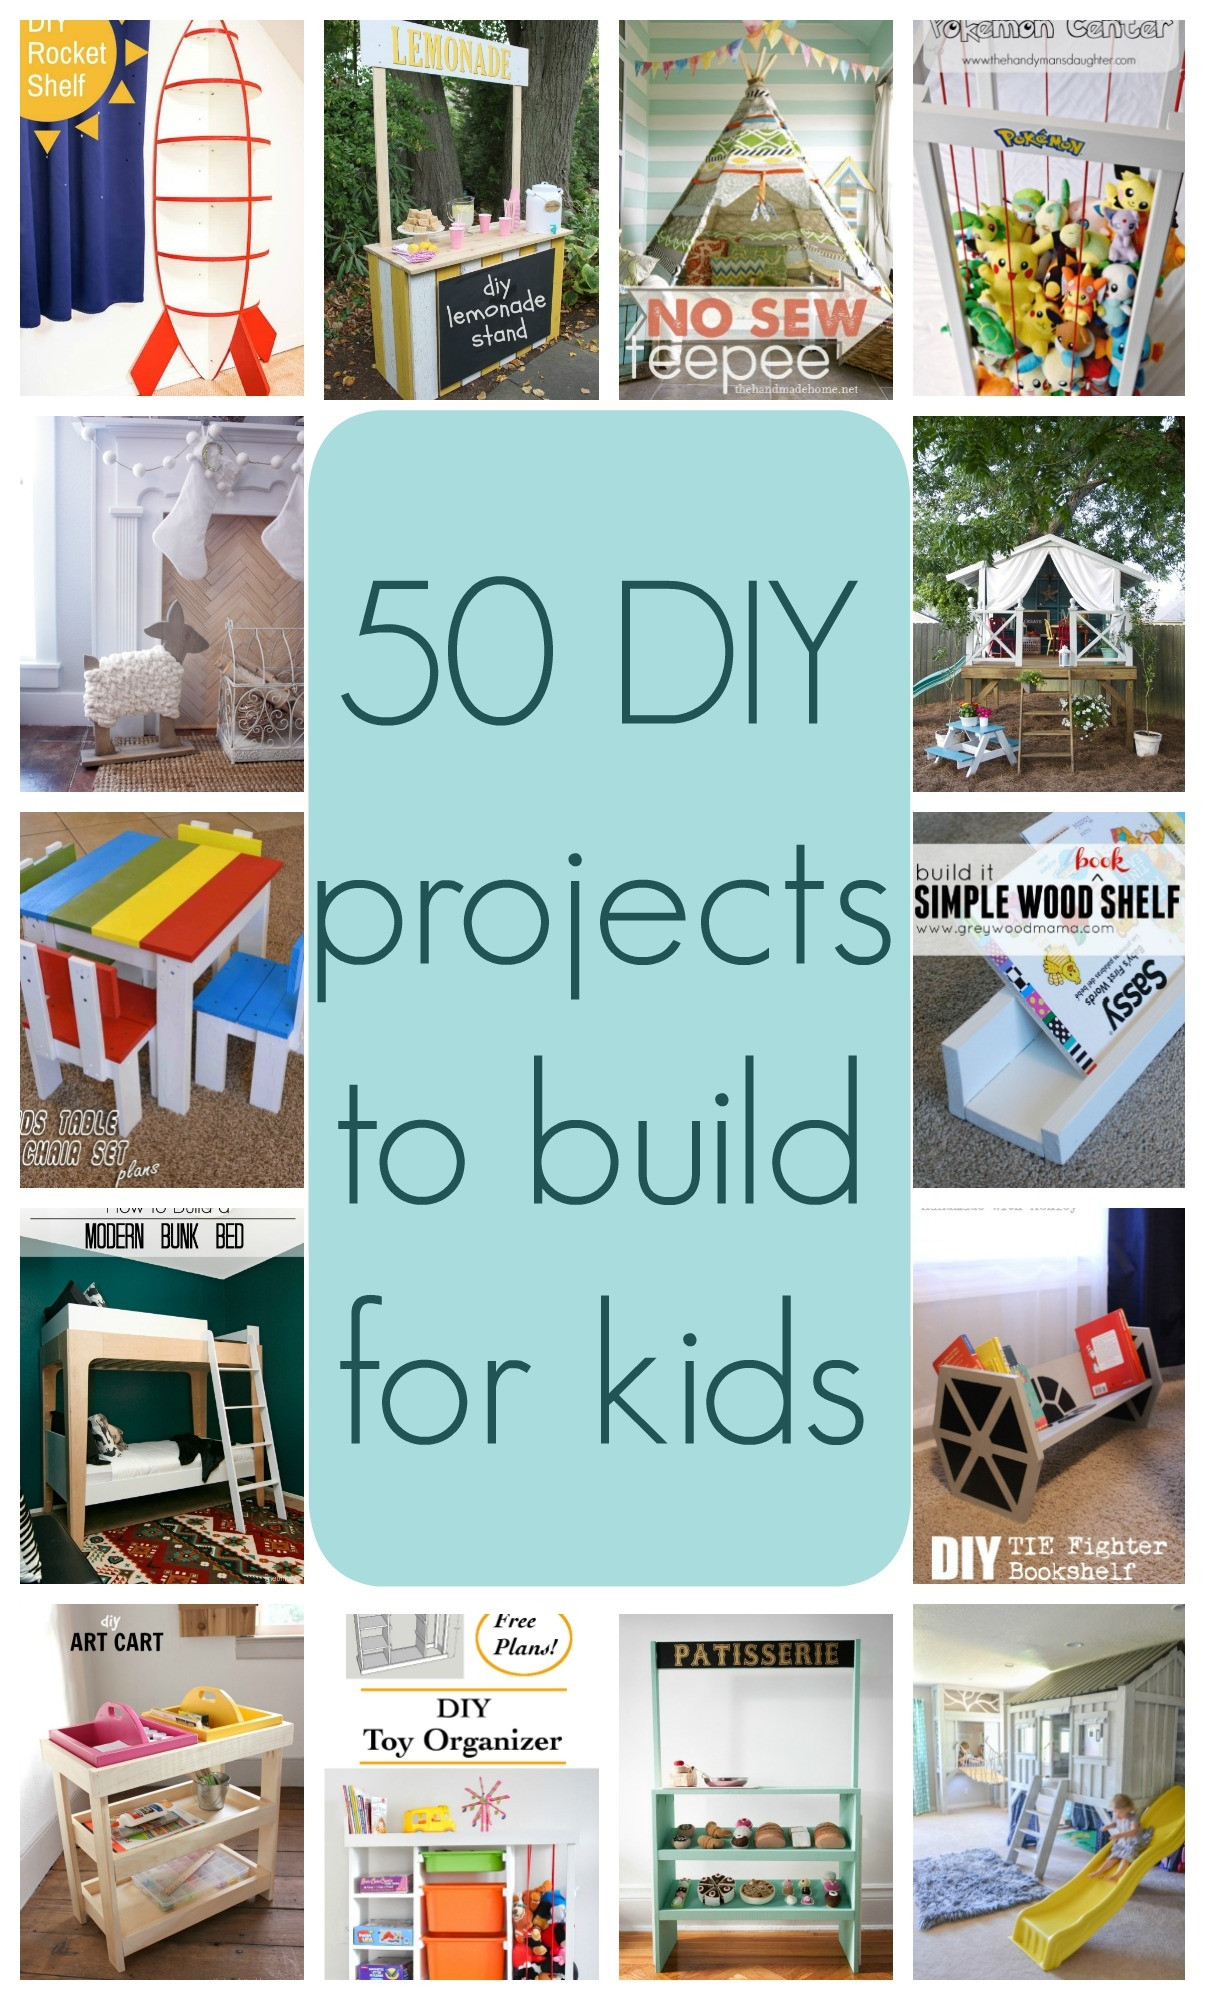 DIY Projects For Toddlers
 50 DIY projects to build for kids Part 1 The Created Home